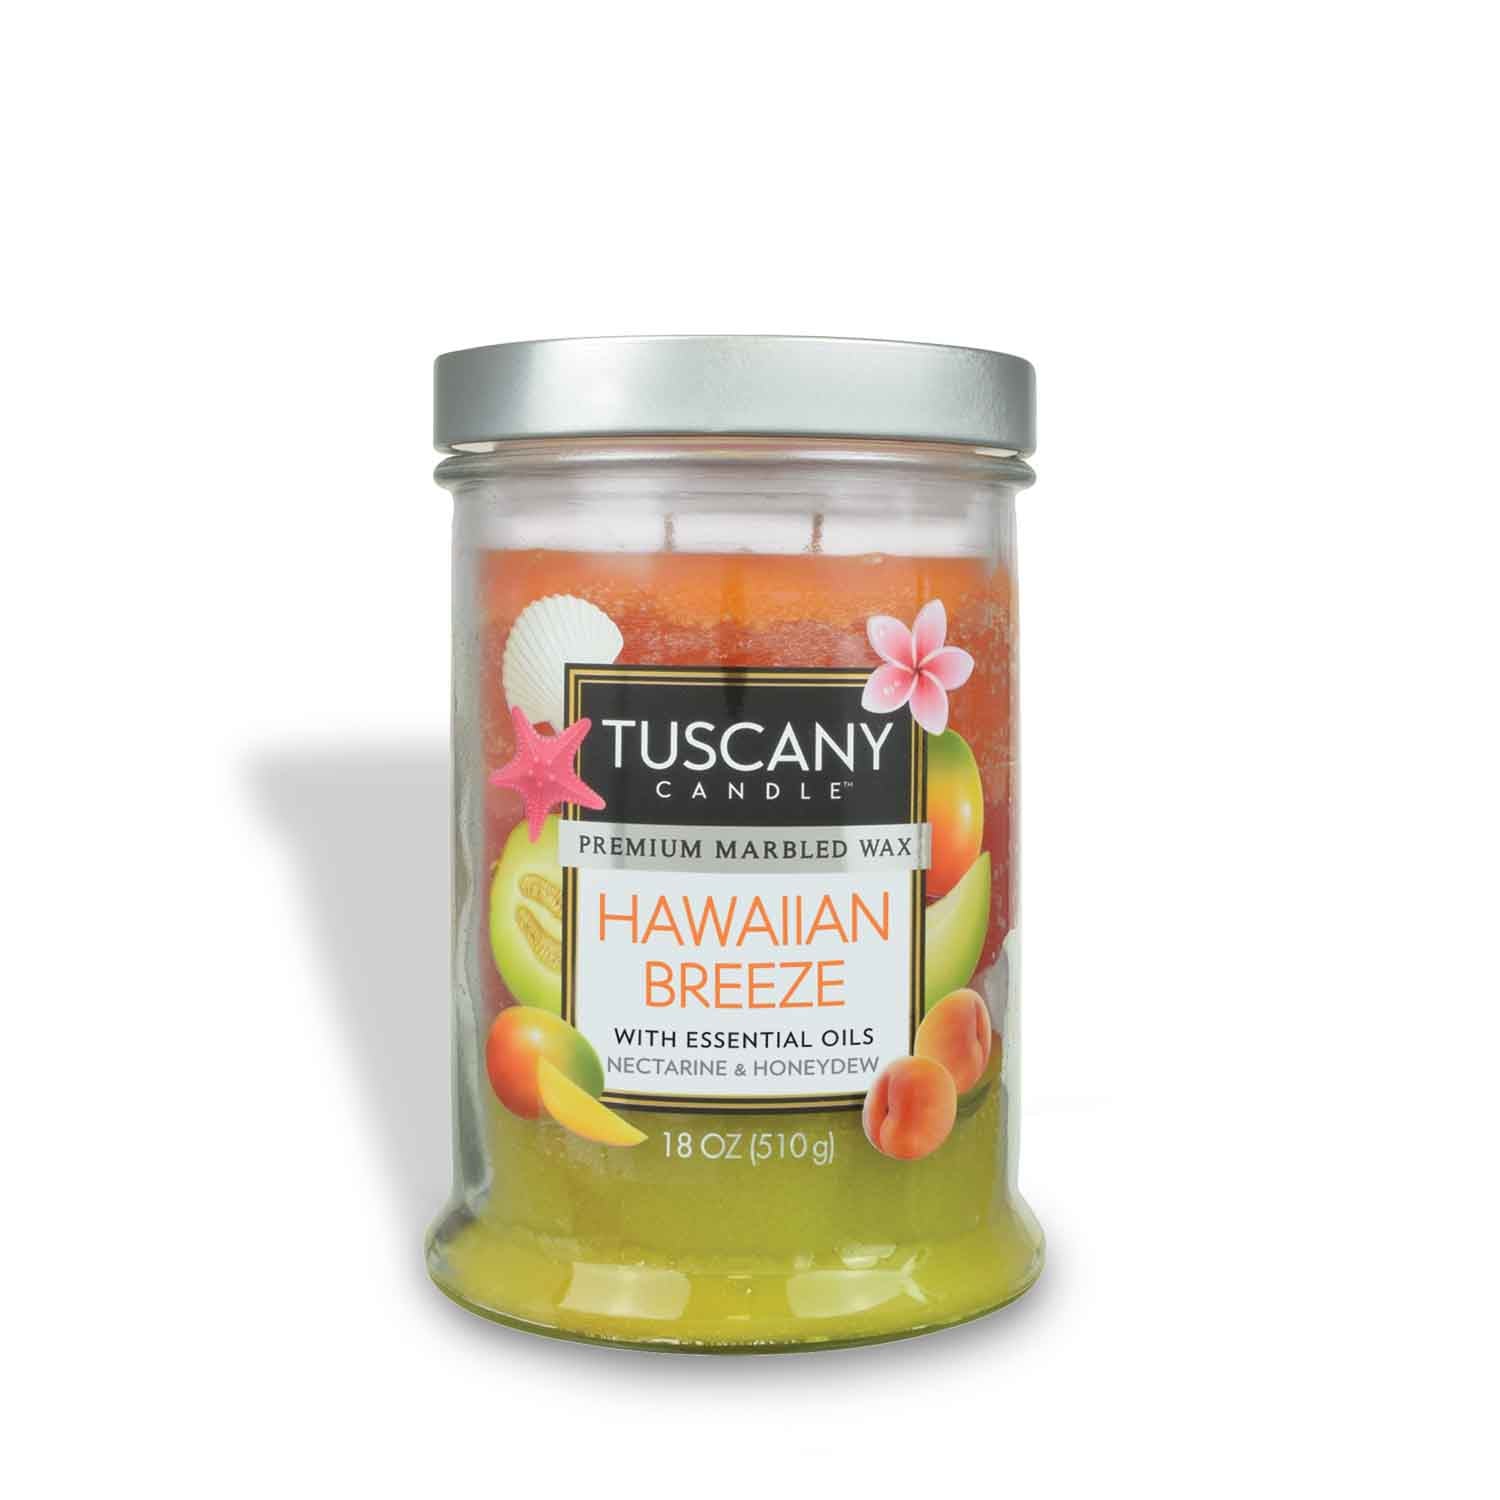 Transport yourself to a tropical paradise with the Tuscany Candle Hawaiian Breeze Long-Lasting Scented Jar Candle (18 oz).